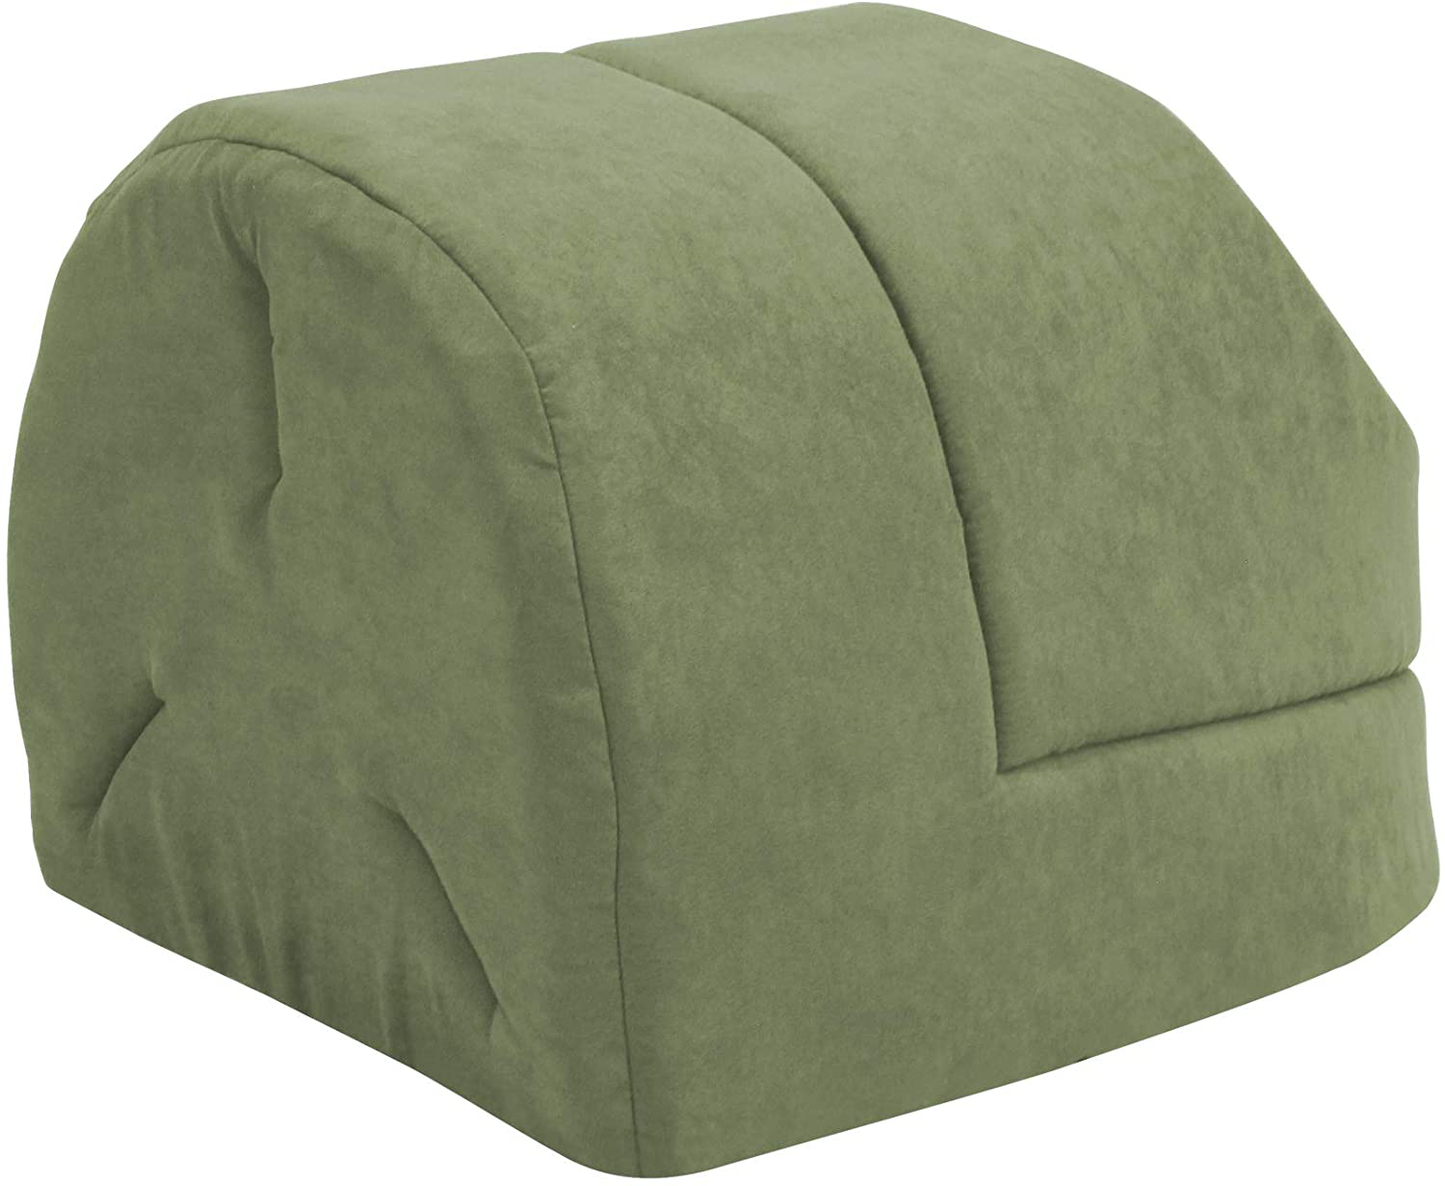 GOOPAWS Cat Cave for Cat and Warming Burrow Cat Bed, Pet Hideway Sleeping Cuddle Cave Animals & Pet Supplies > Pet Supplies > Cat Supplies > Cat Beds GOOPAWS   